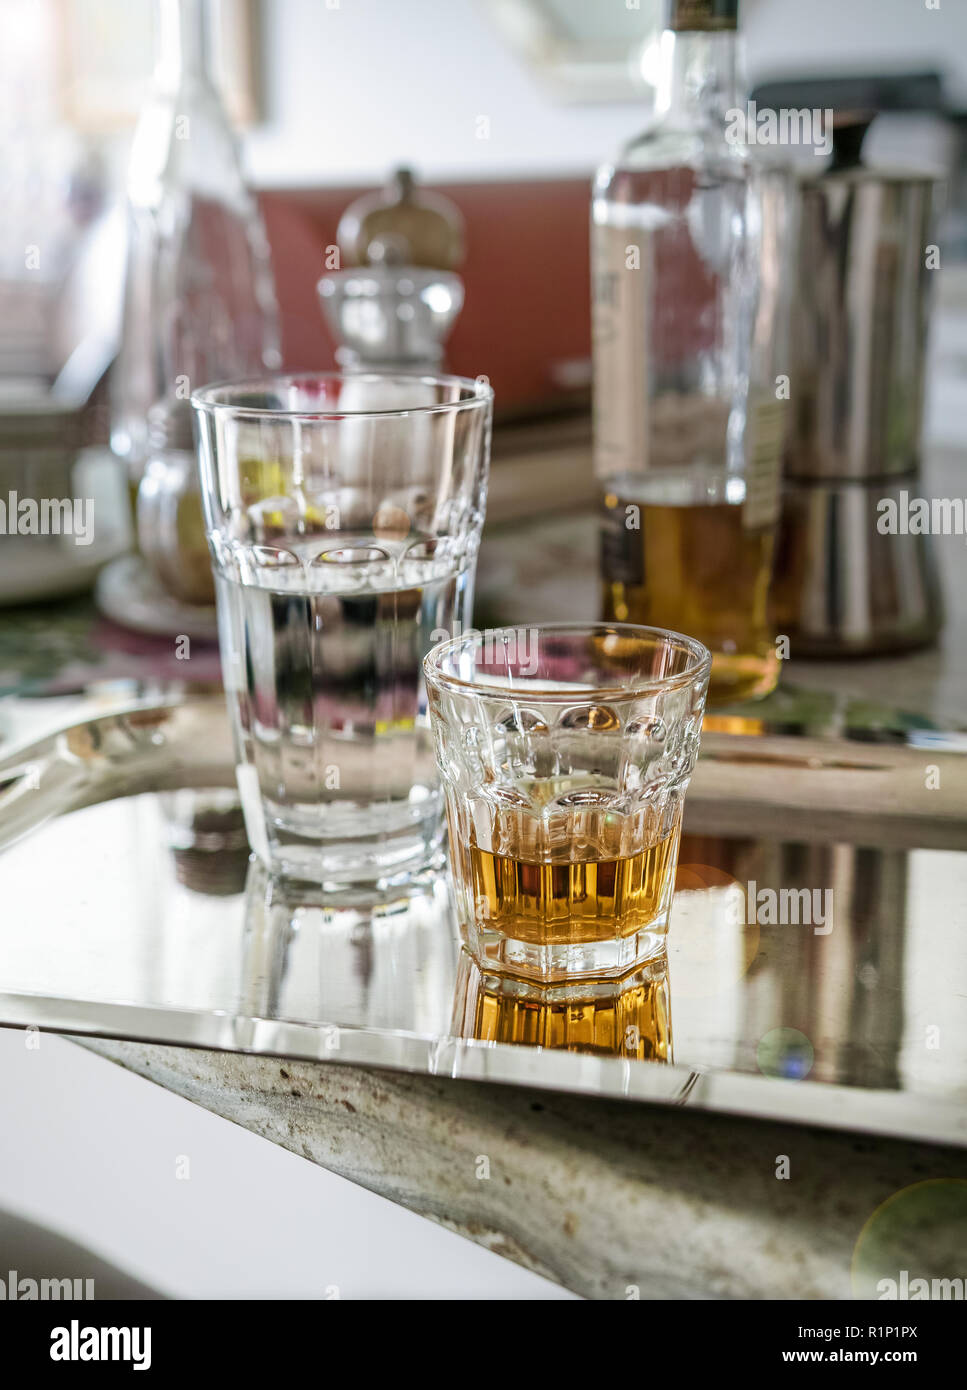 After the party, on the kitchen counter, a glass of alcohol and a large glass of water remain on the silver tray. Stock Photo